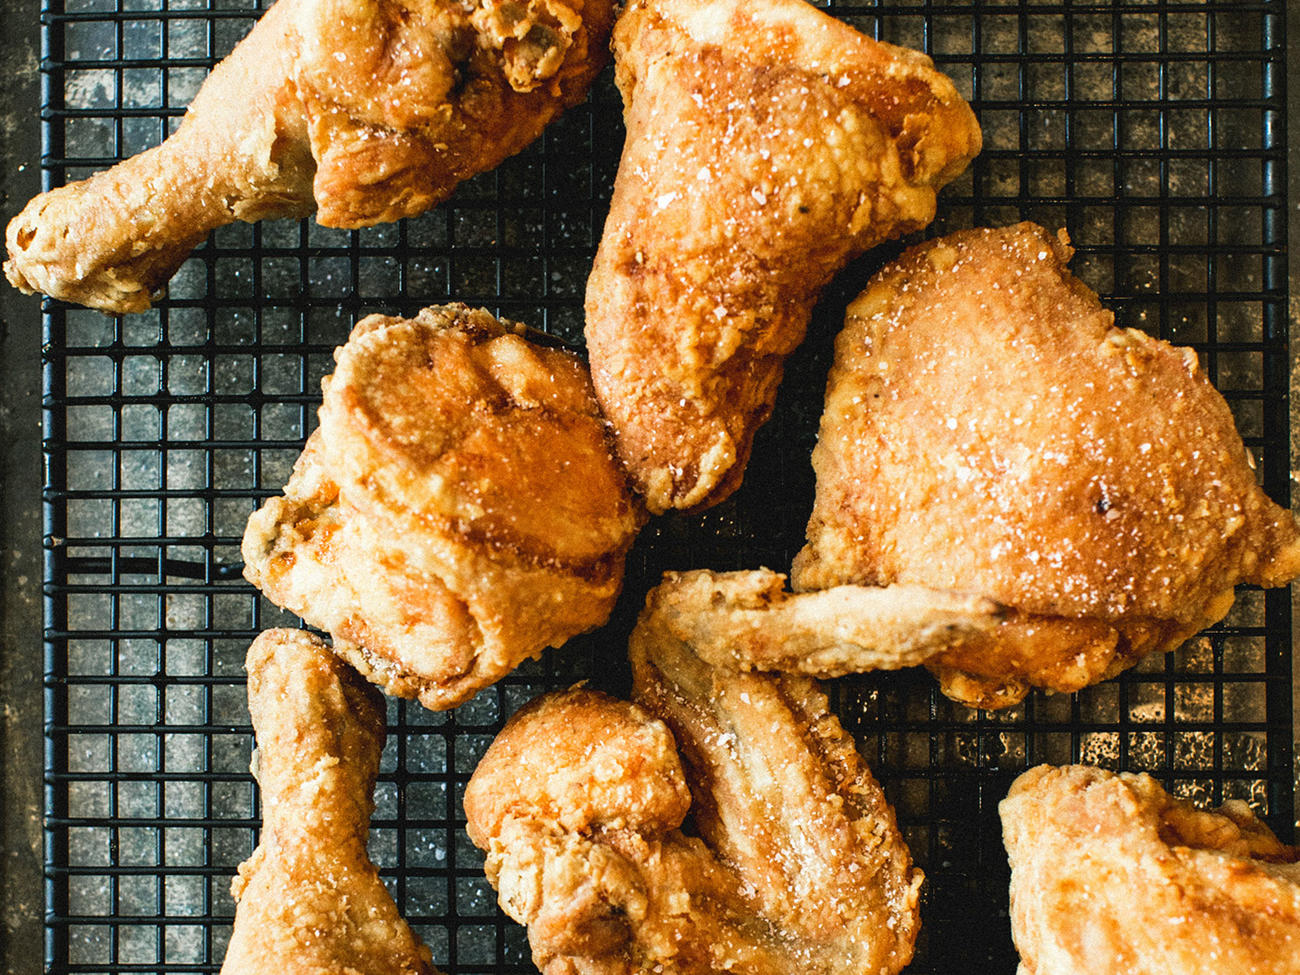 Making Foolproof Fried Chicken